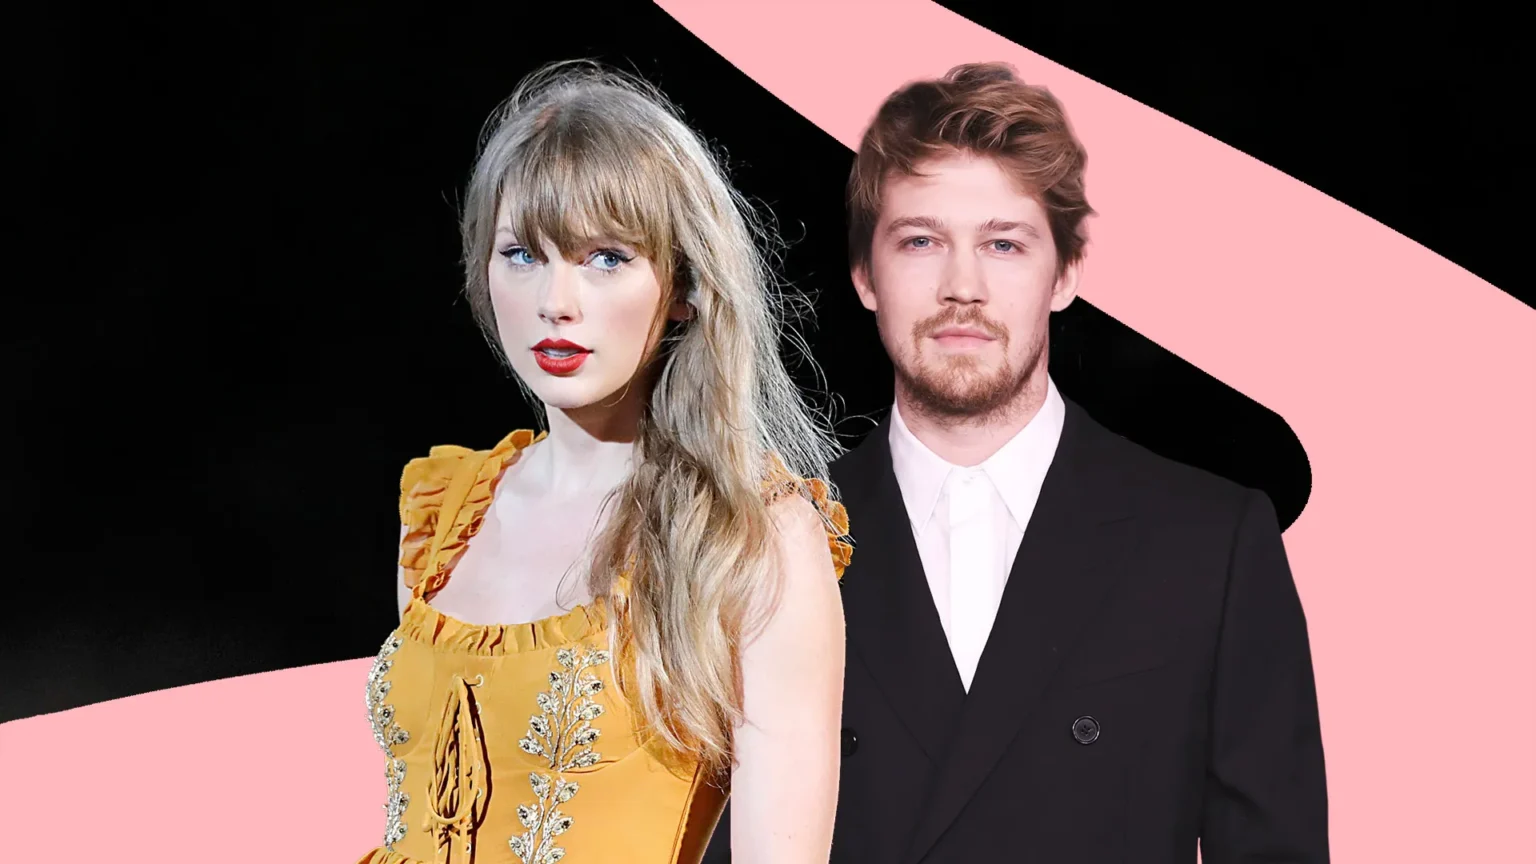 joe-alwyn-reveals-the-actual-perspective-behind-the-breakup-with-taylor-swift